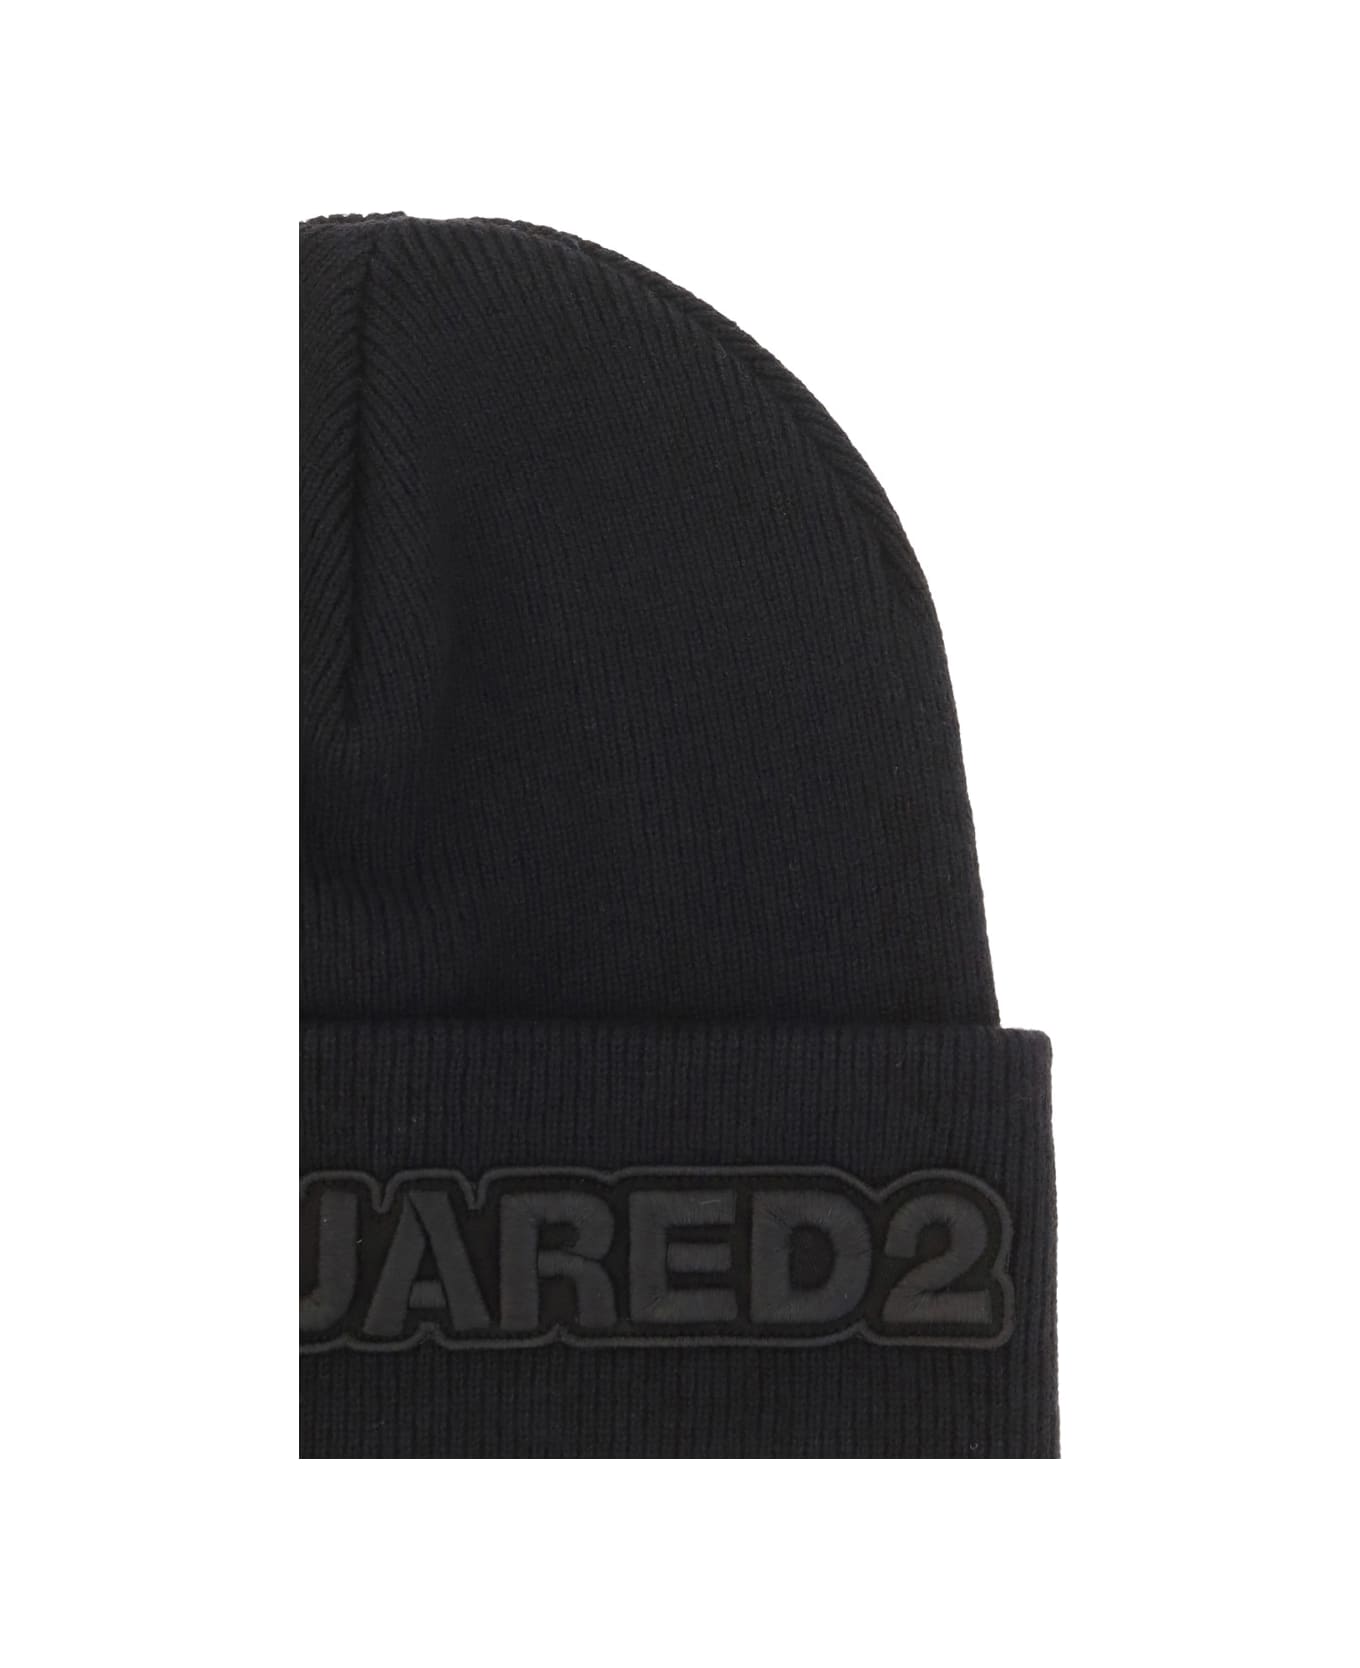 Dsquared2 Logo Embroidered Knit Beanie - M084 帽子